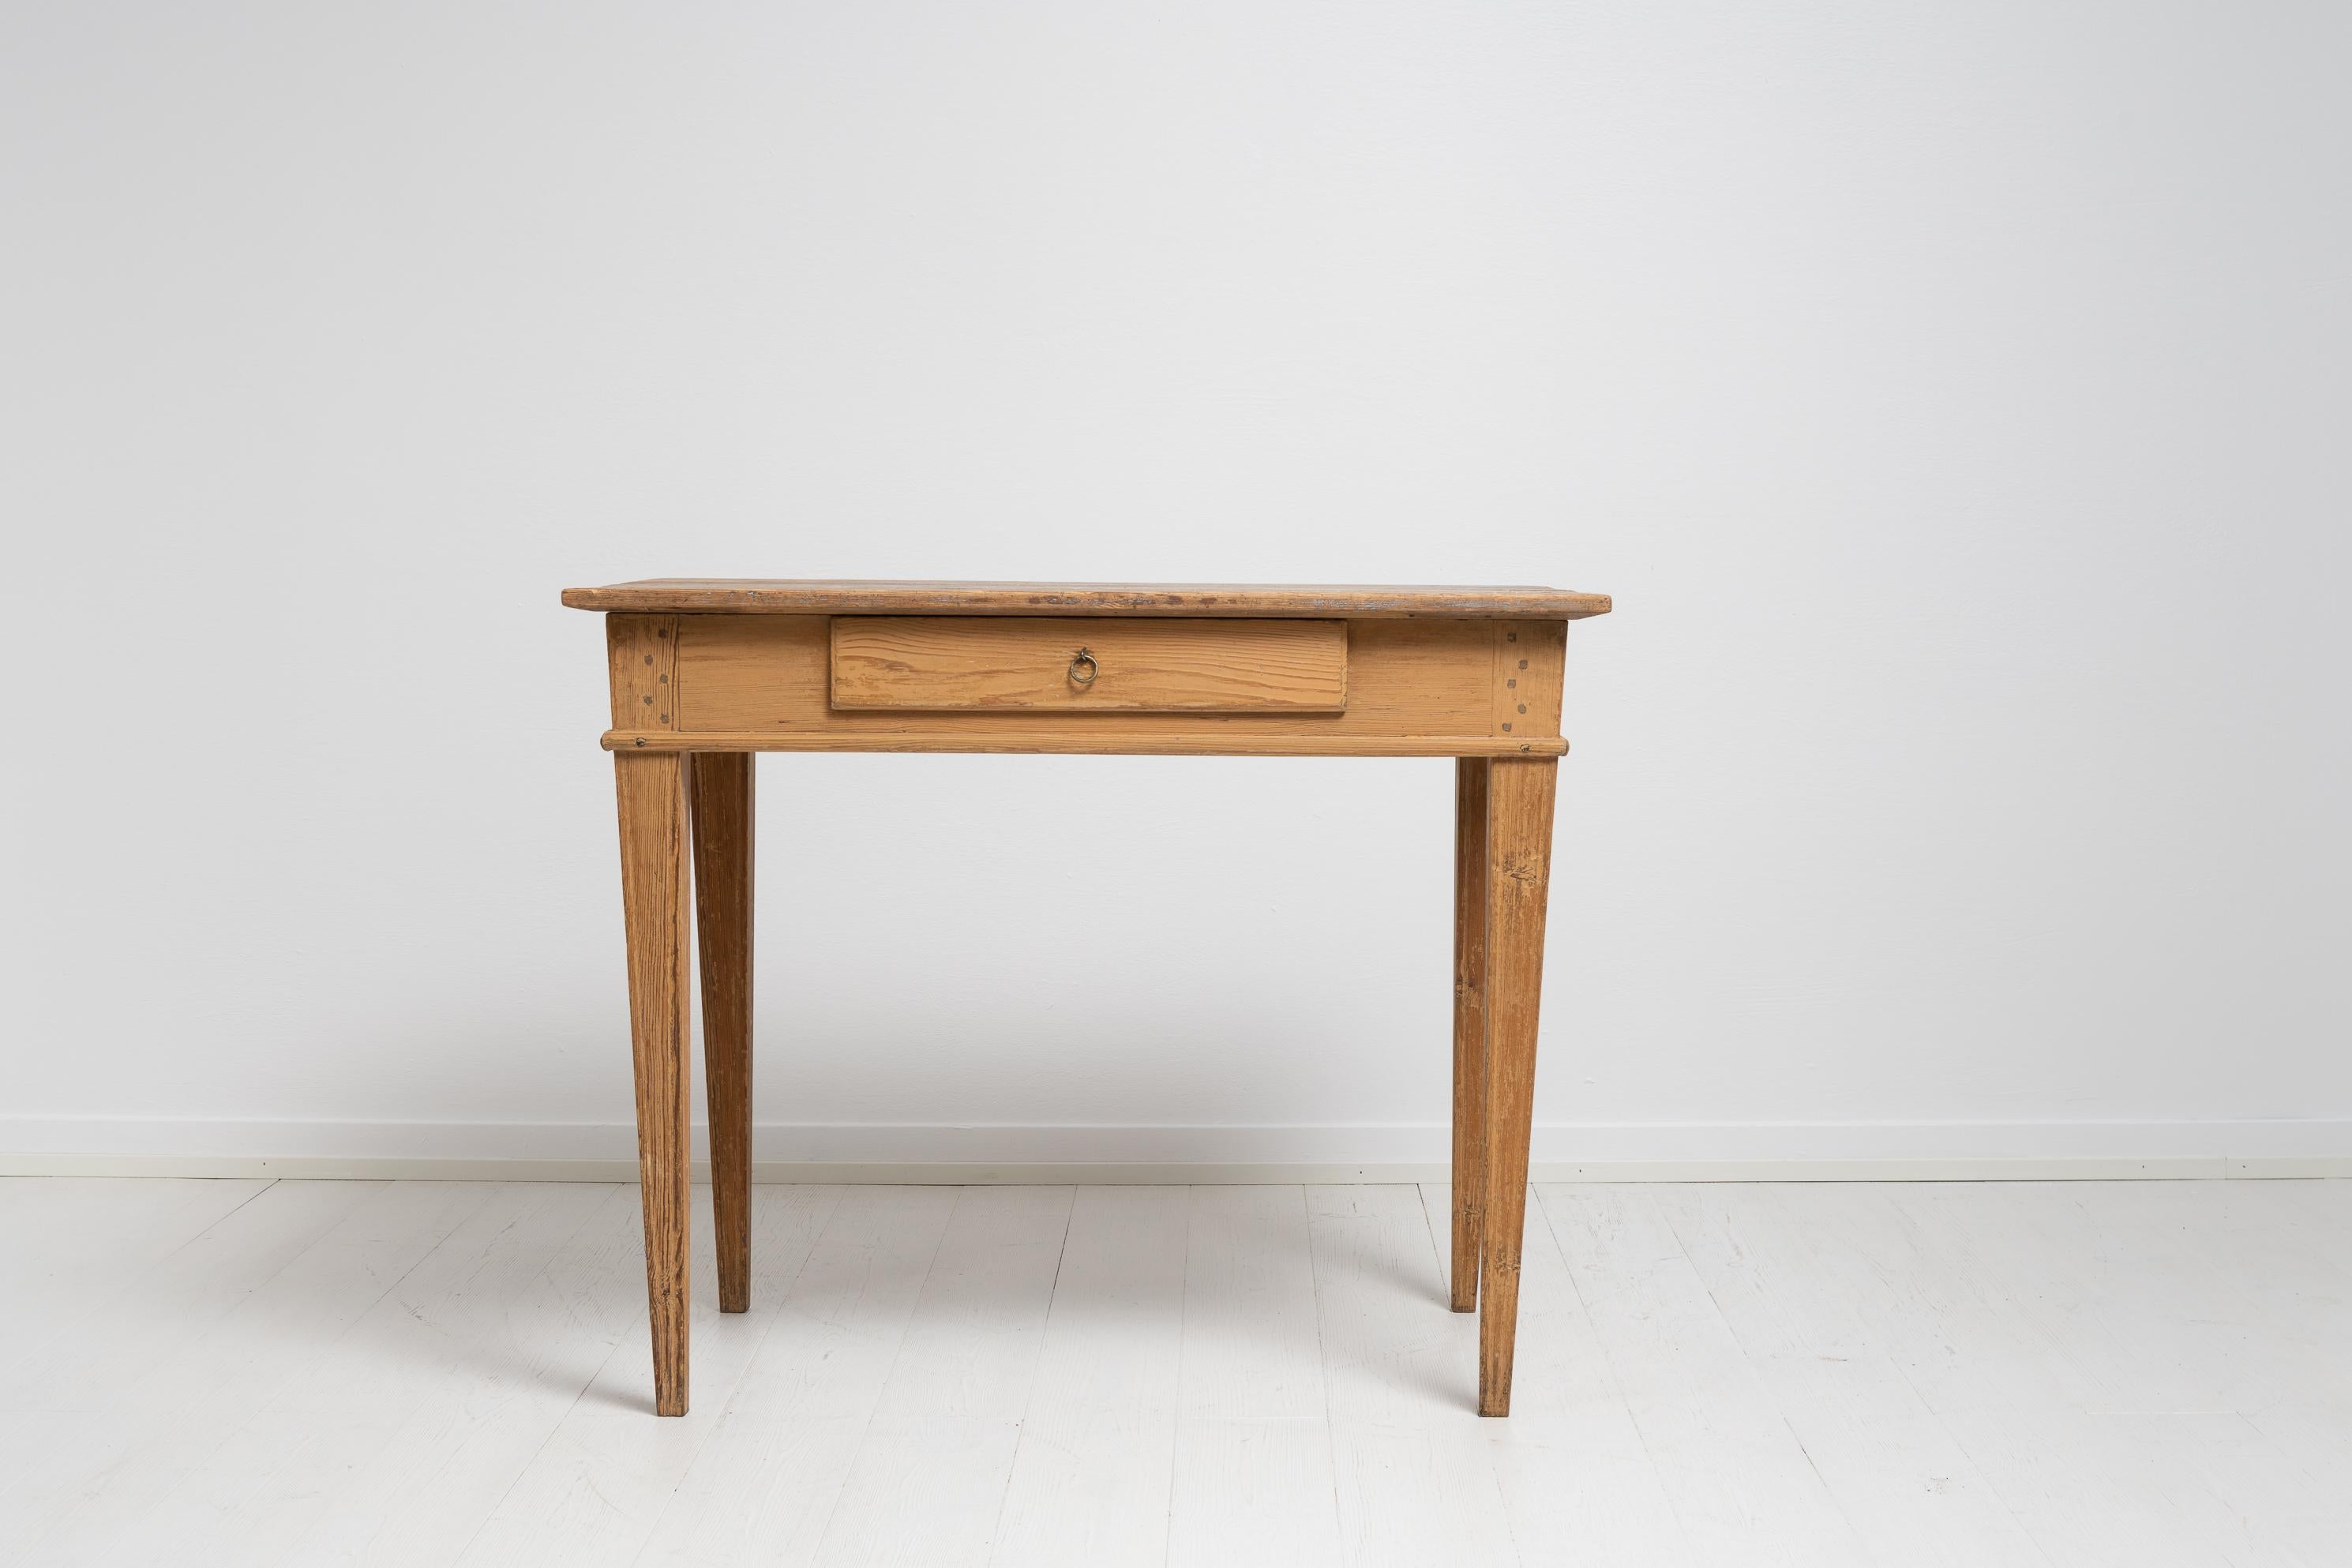 Northern Swedish gustavian country home desk made during the early 19th century, between 1810 and 1820. The desk is a genuine country home furniture and has tapered legs with hand carved flutes and a drawer in the rim. Simple and functional with